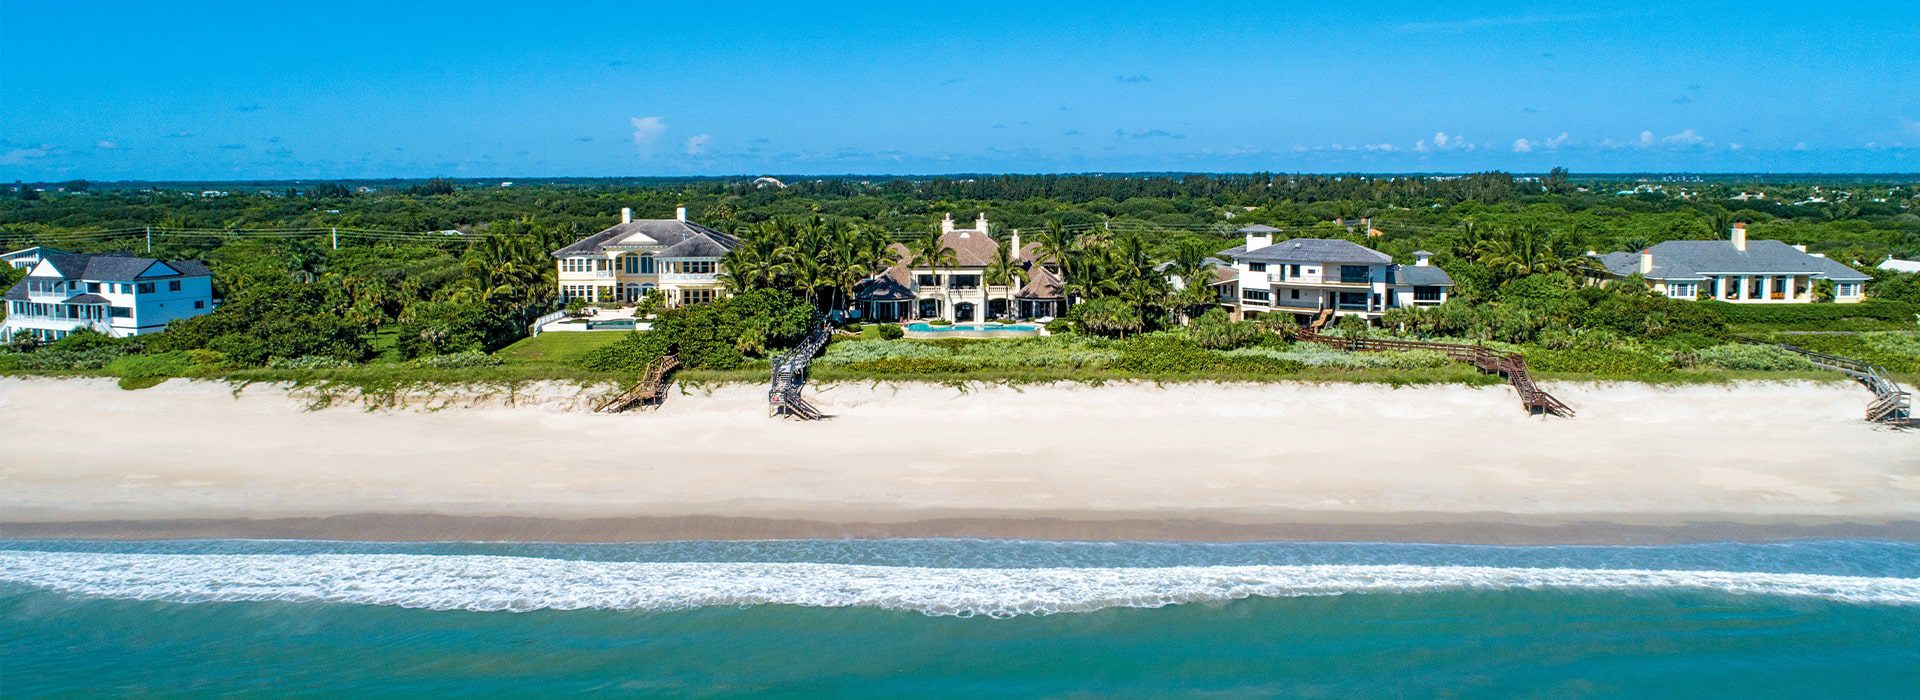 aerial view of the orchid island oceanfront homes